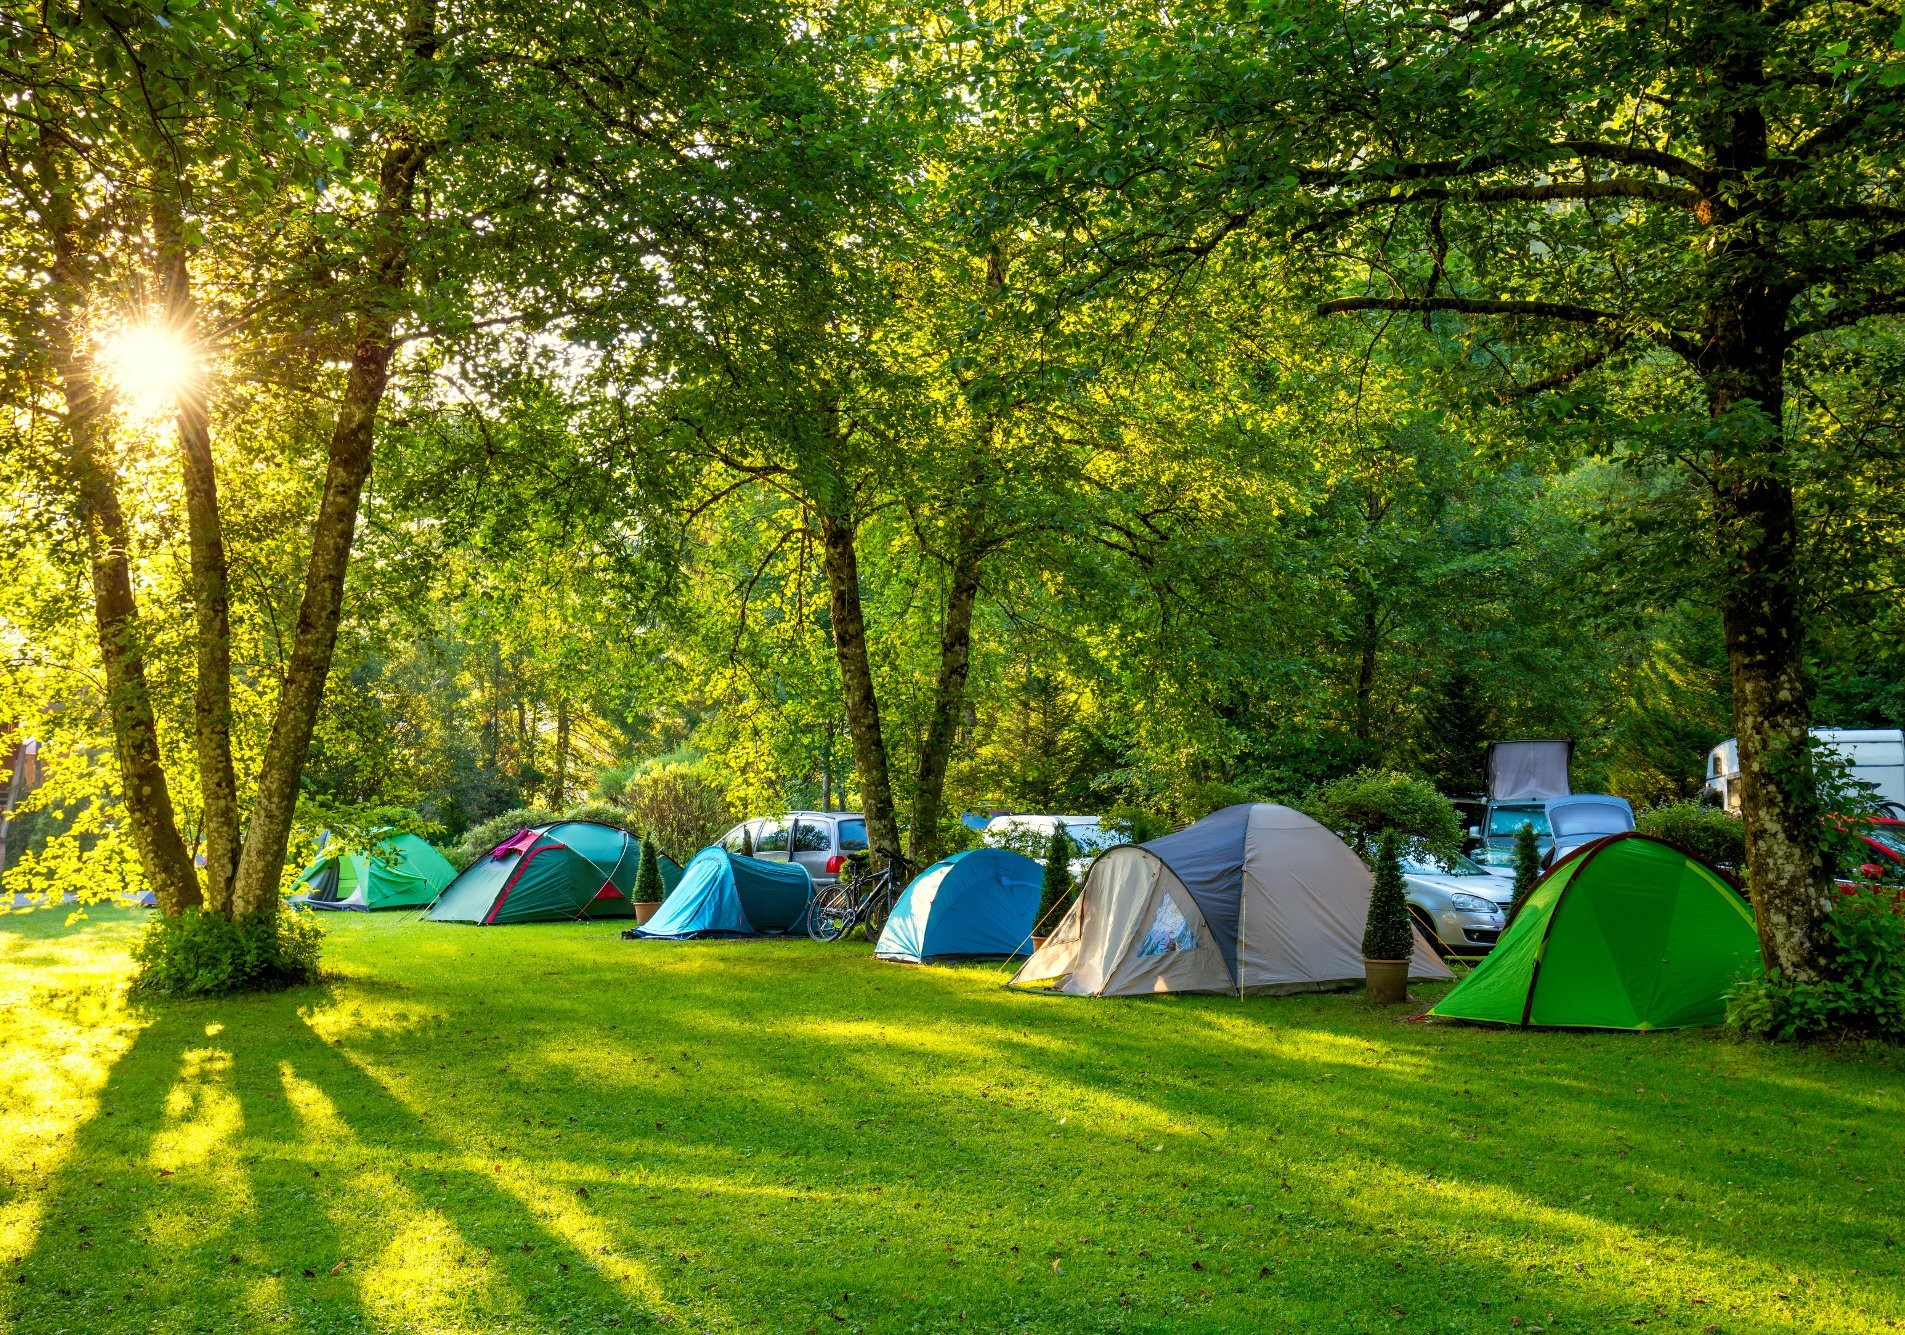 Camping in Antalya: The 7 Best Camping Spots